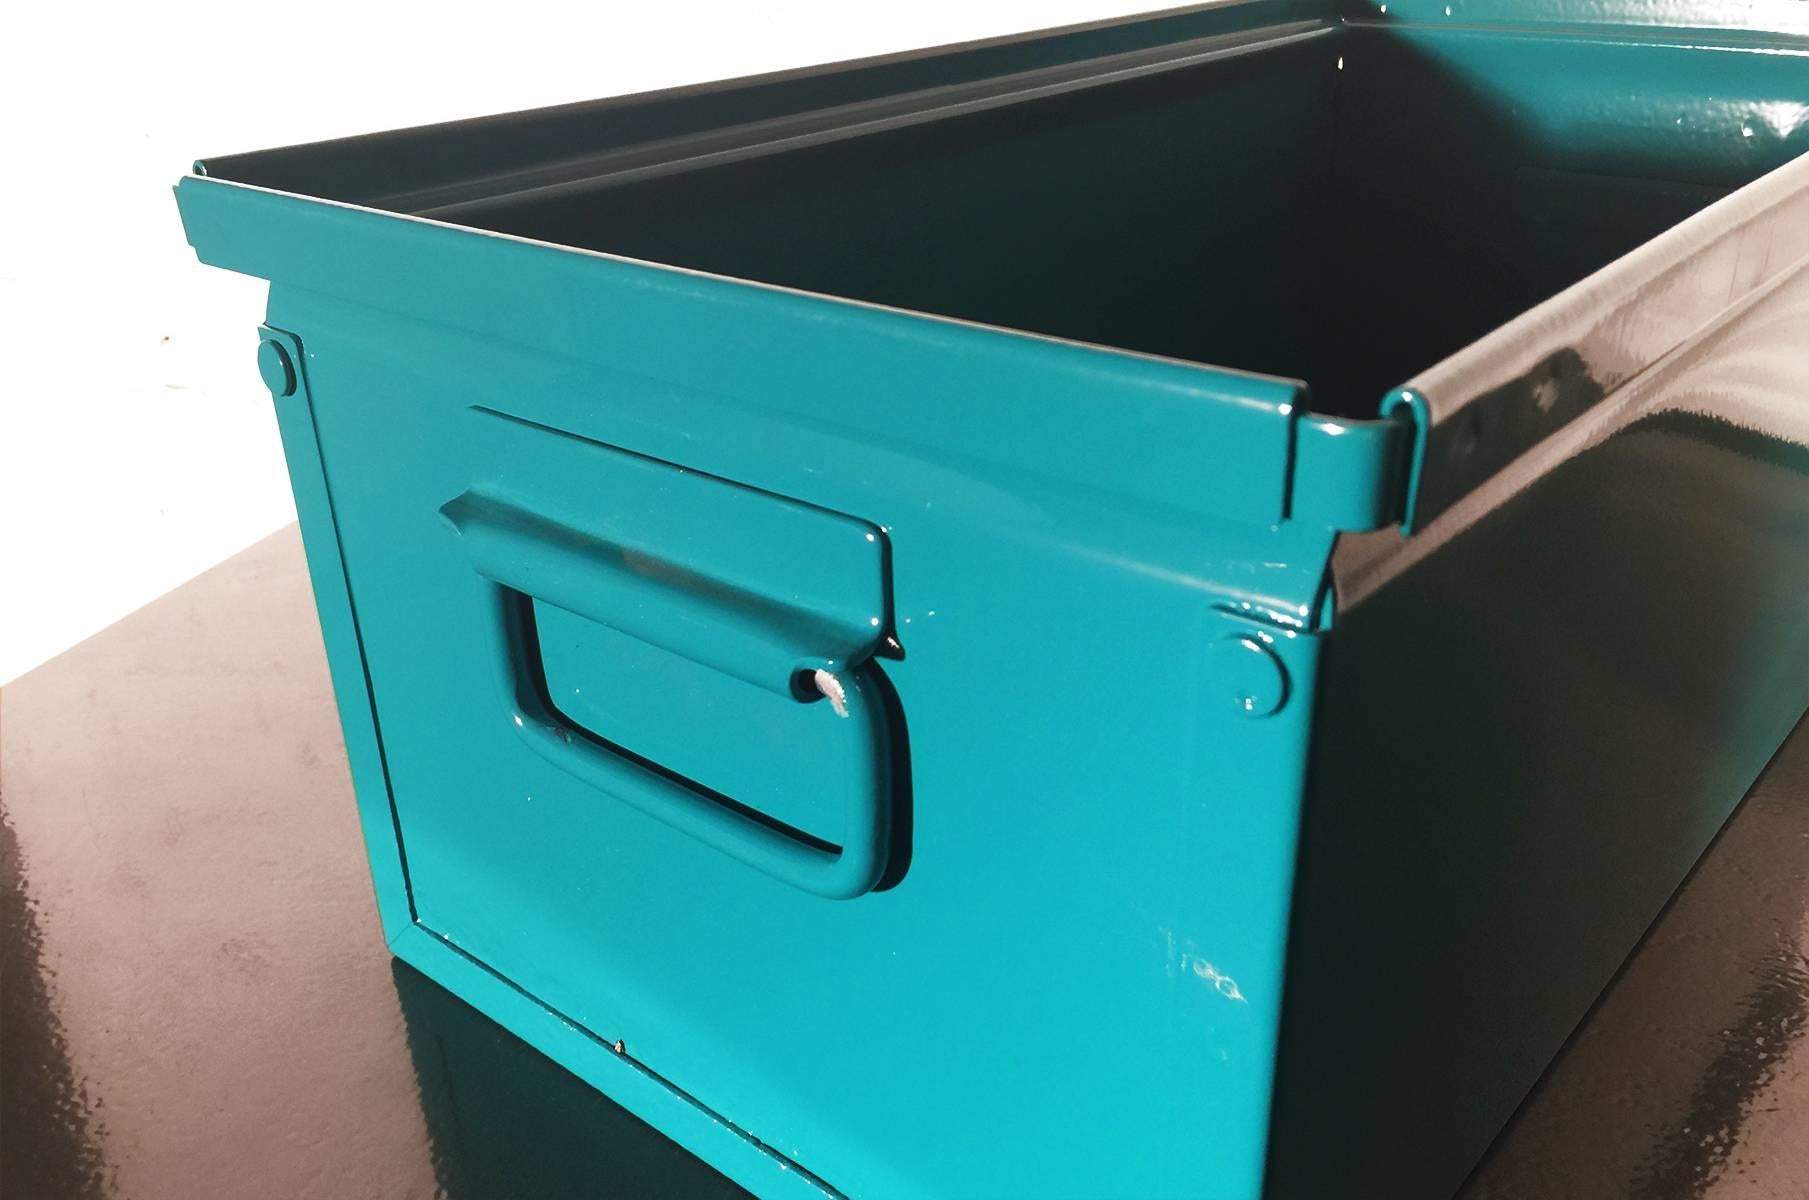 Powder-Coated 1940s Industrial Storage Bin, Refinished in Teal